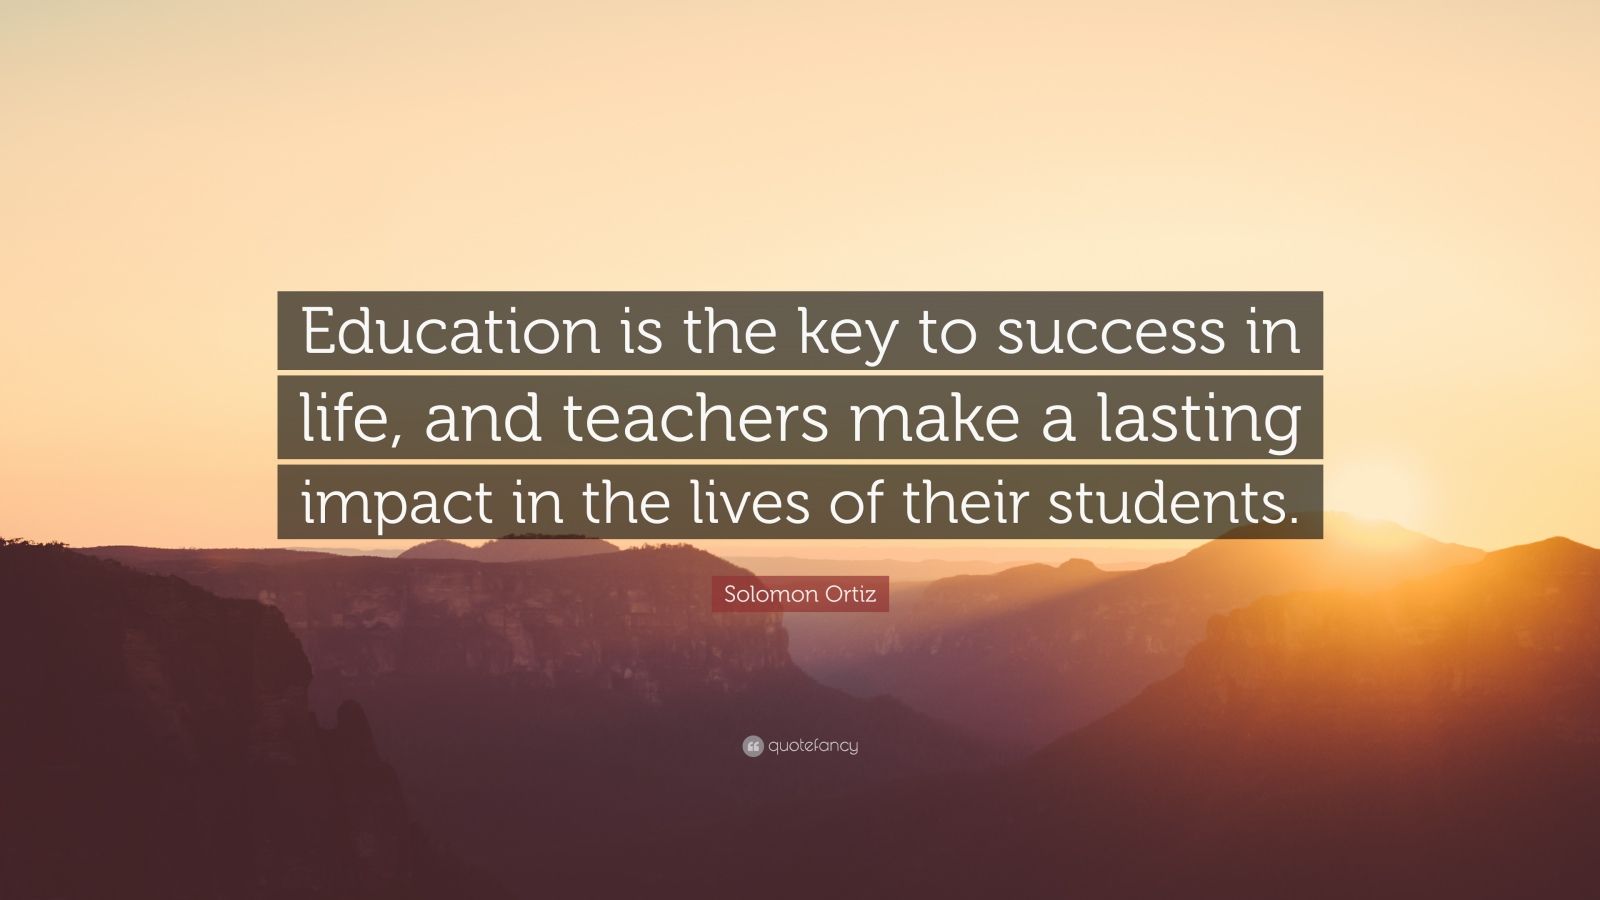 Solomon Ortiz Quote: “Education is the key to success in life, and